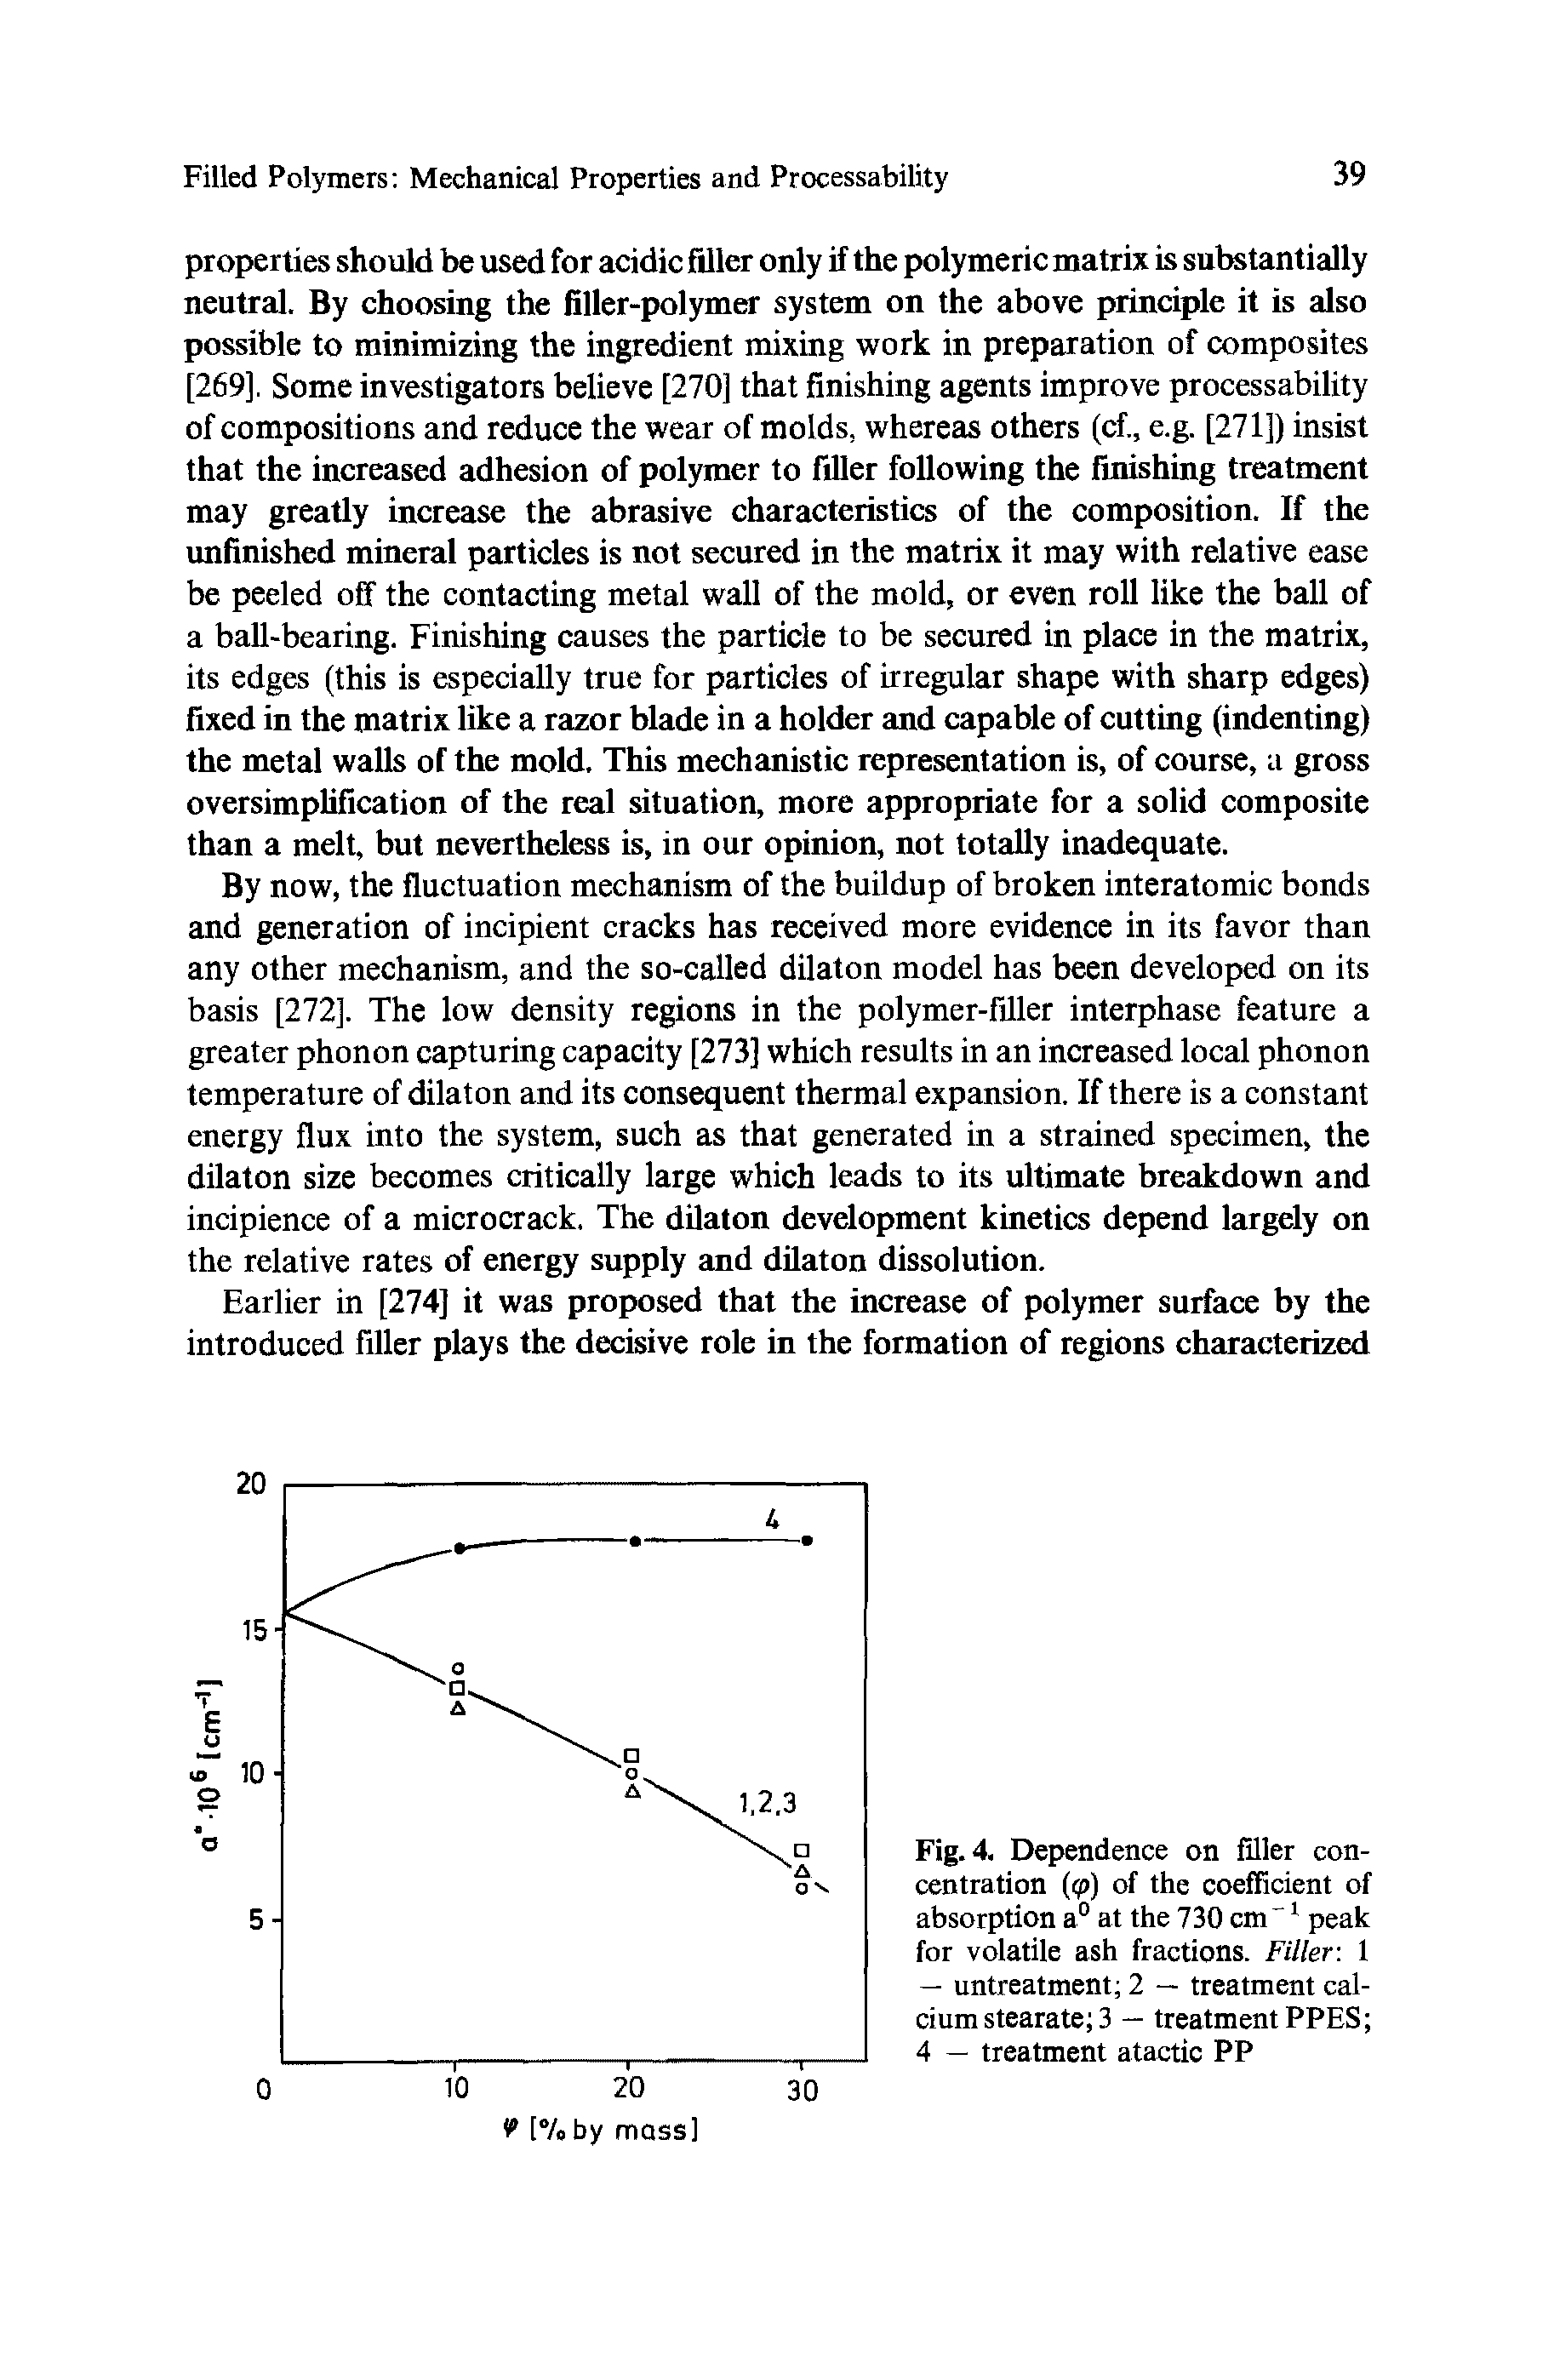 Fig. 4. Dependence on filler concentration (<p) of the coefficient of absorption a° at the 730 cm 1 peak for volatile ash fractions. Filler 1 — untreatment 2 — treatment calcium stearate 3 — treatment PPES 4 — treatment atactic PP...